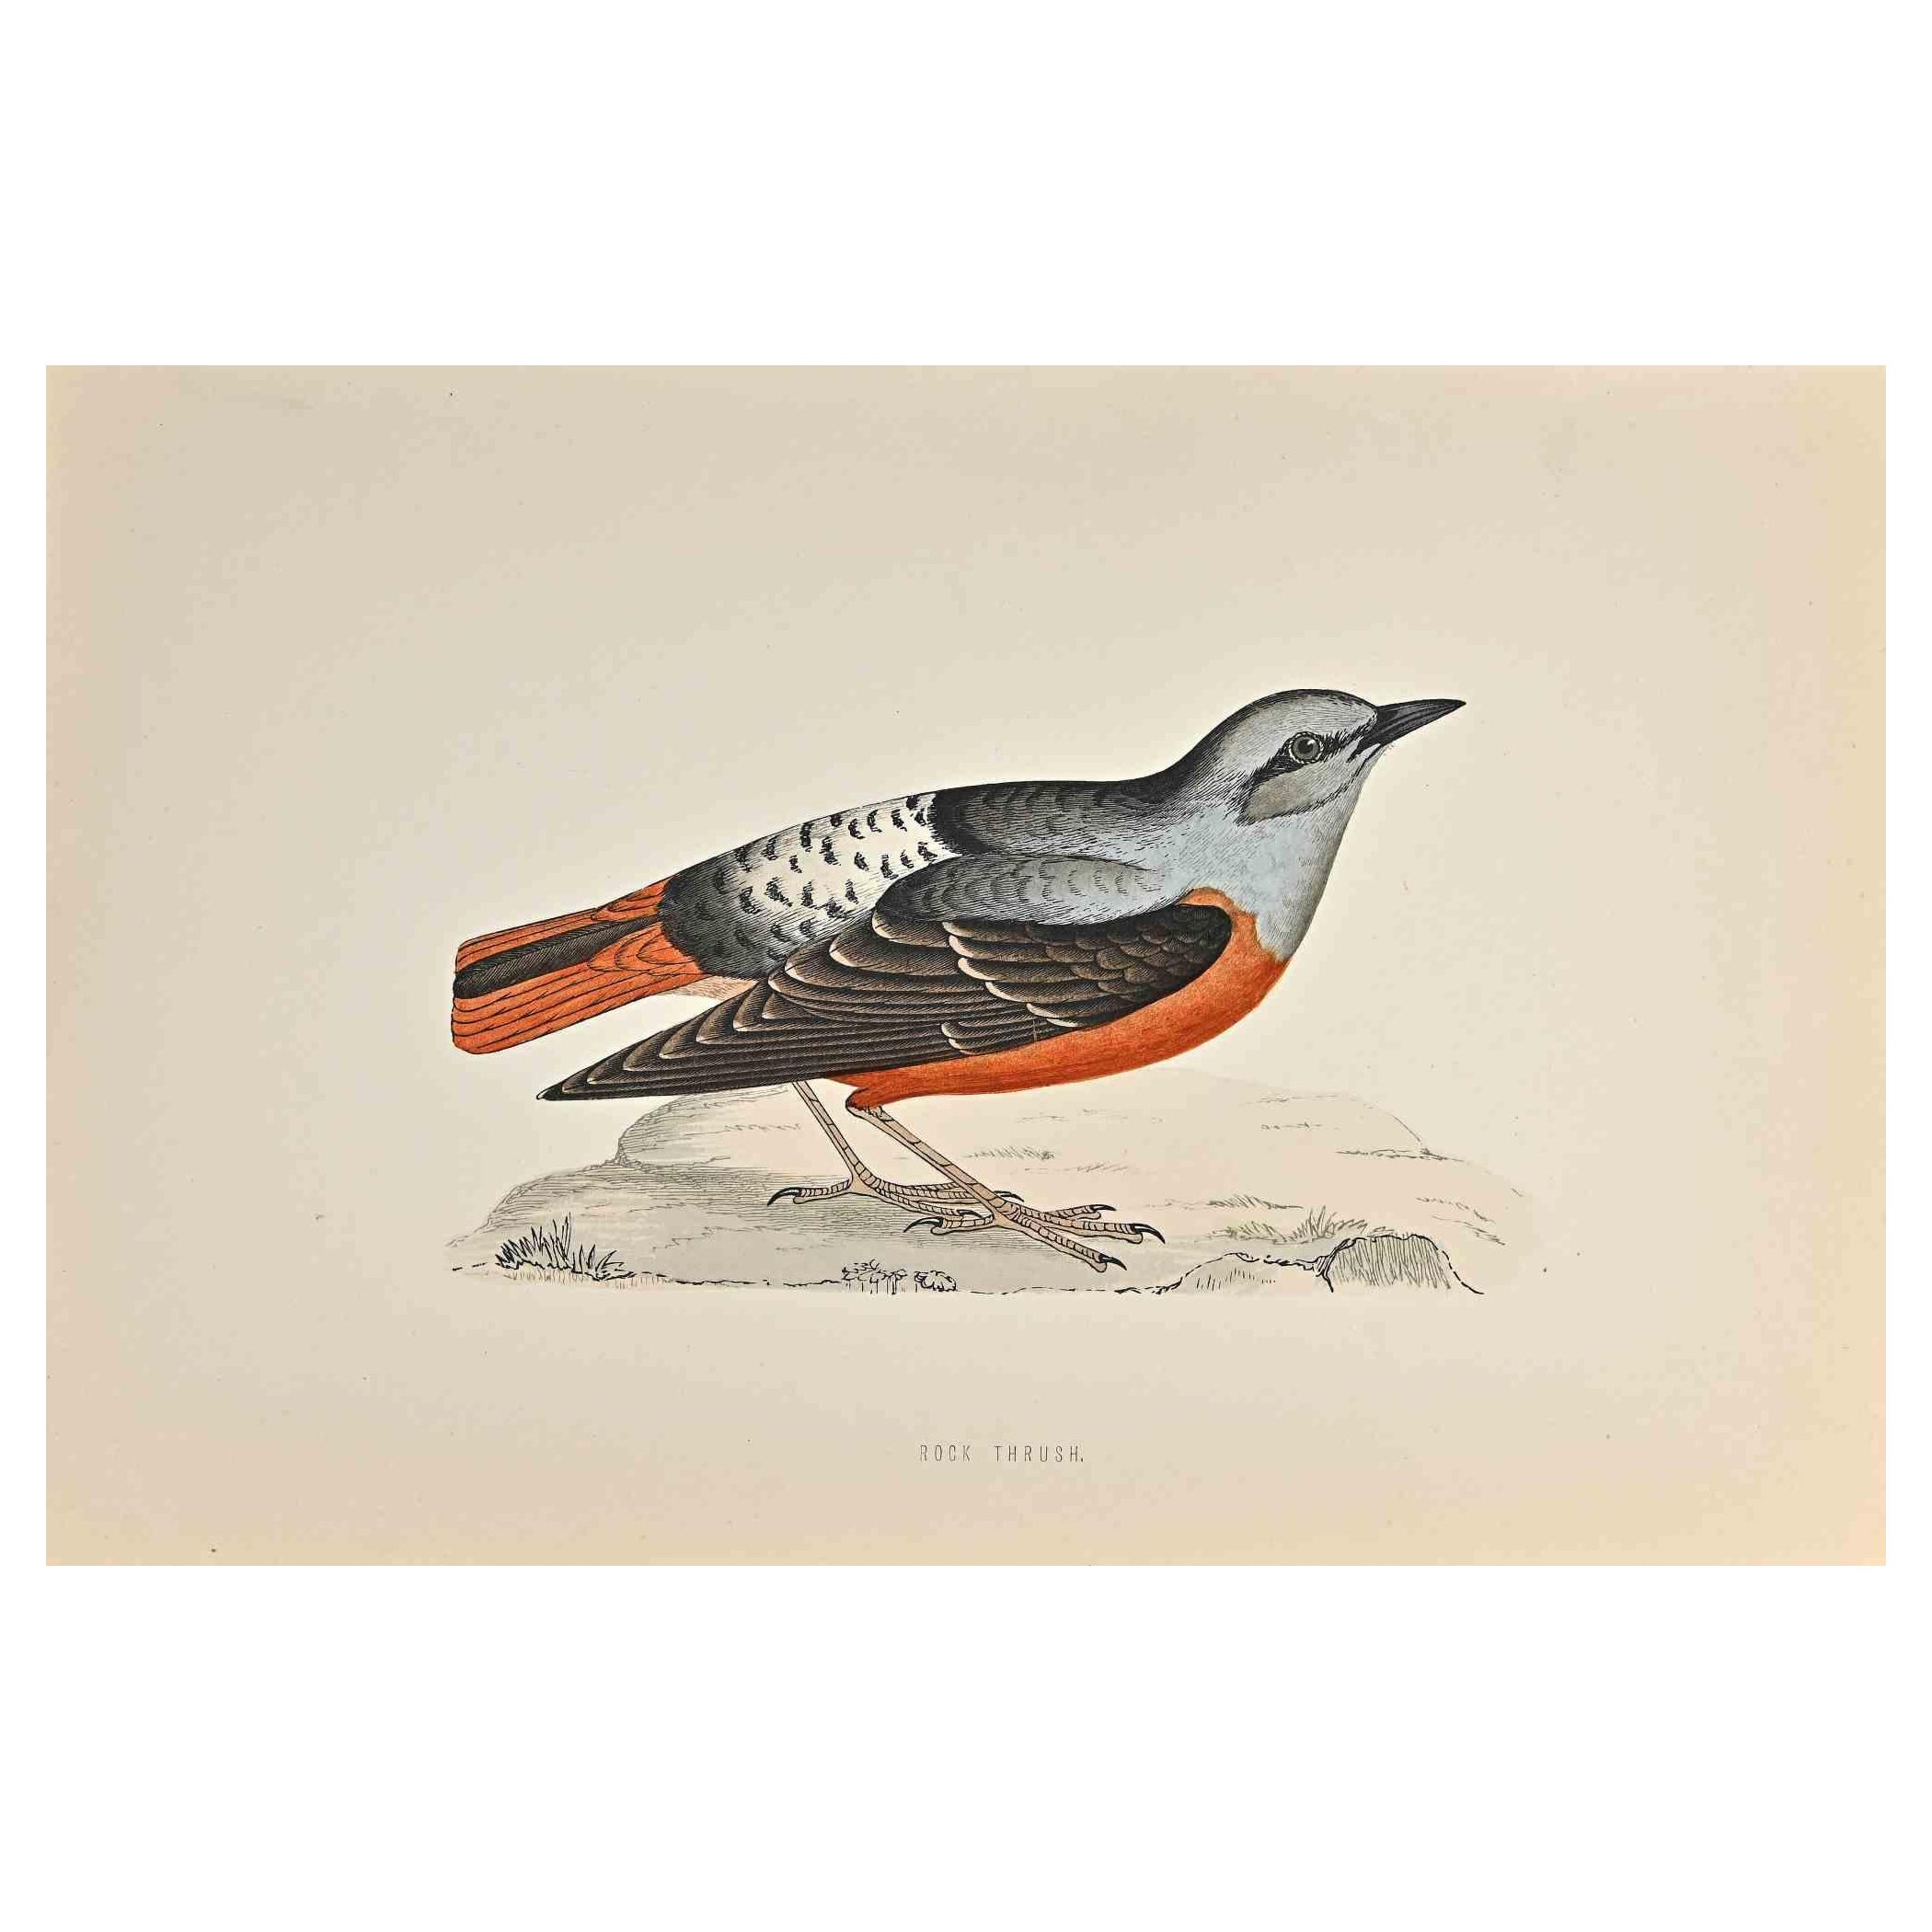 Rock Thrush is a modern artwork realized in 1870 by the British artist Alexander Francis Lydon (1836-1917) . 

Woodcut print, hand colored, published by London, Bell & Sons, 1870.  Name of the bird printed in plate. This work is part of a print